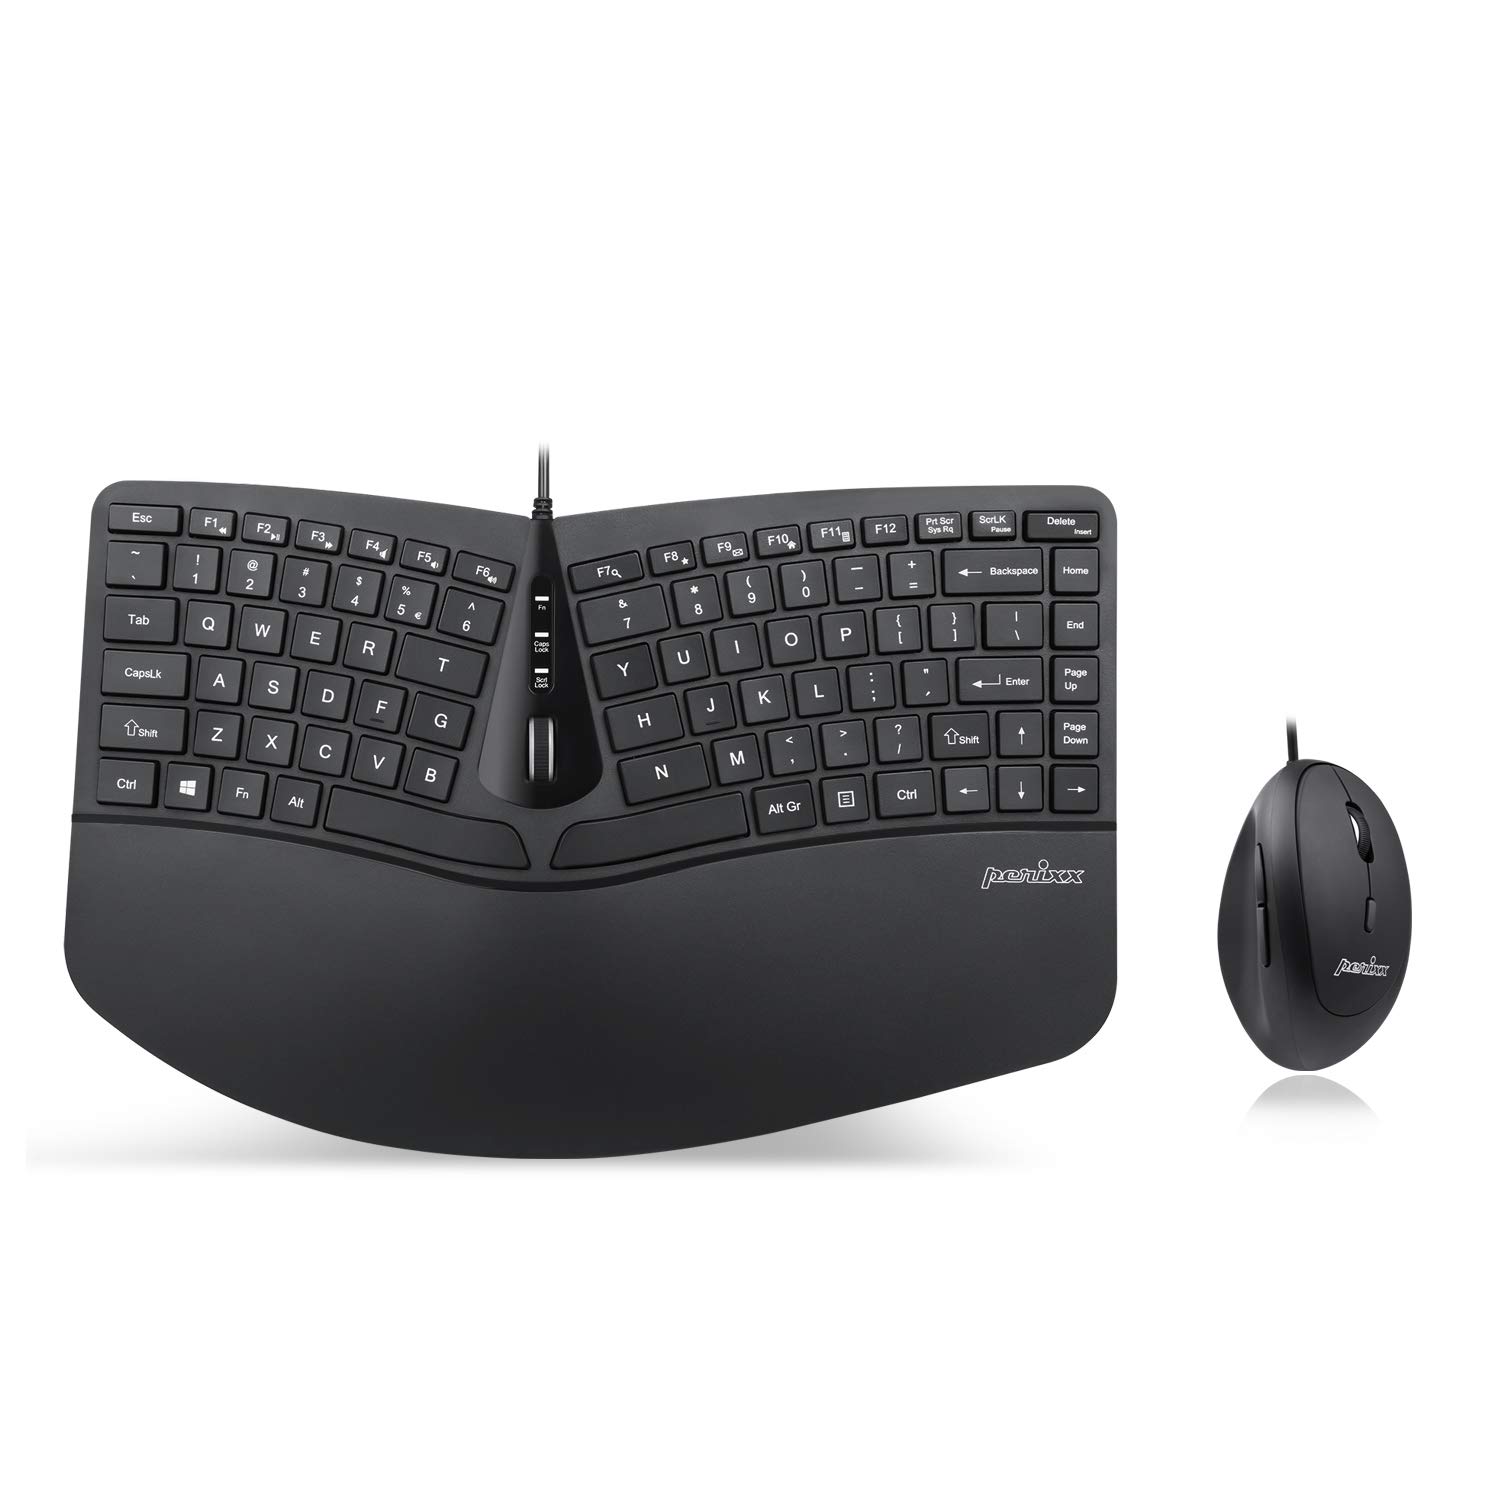 PERIDUO-406A Wired Mini Ergonomic Split Keyboard and Vertical Mouse Combo